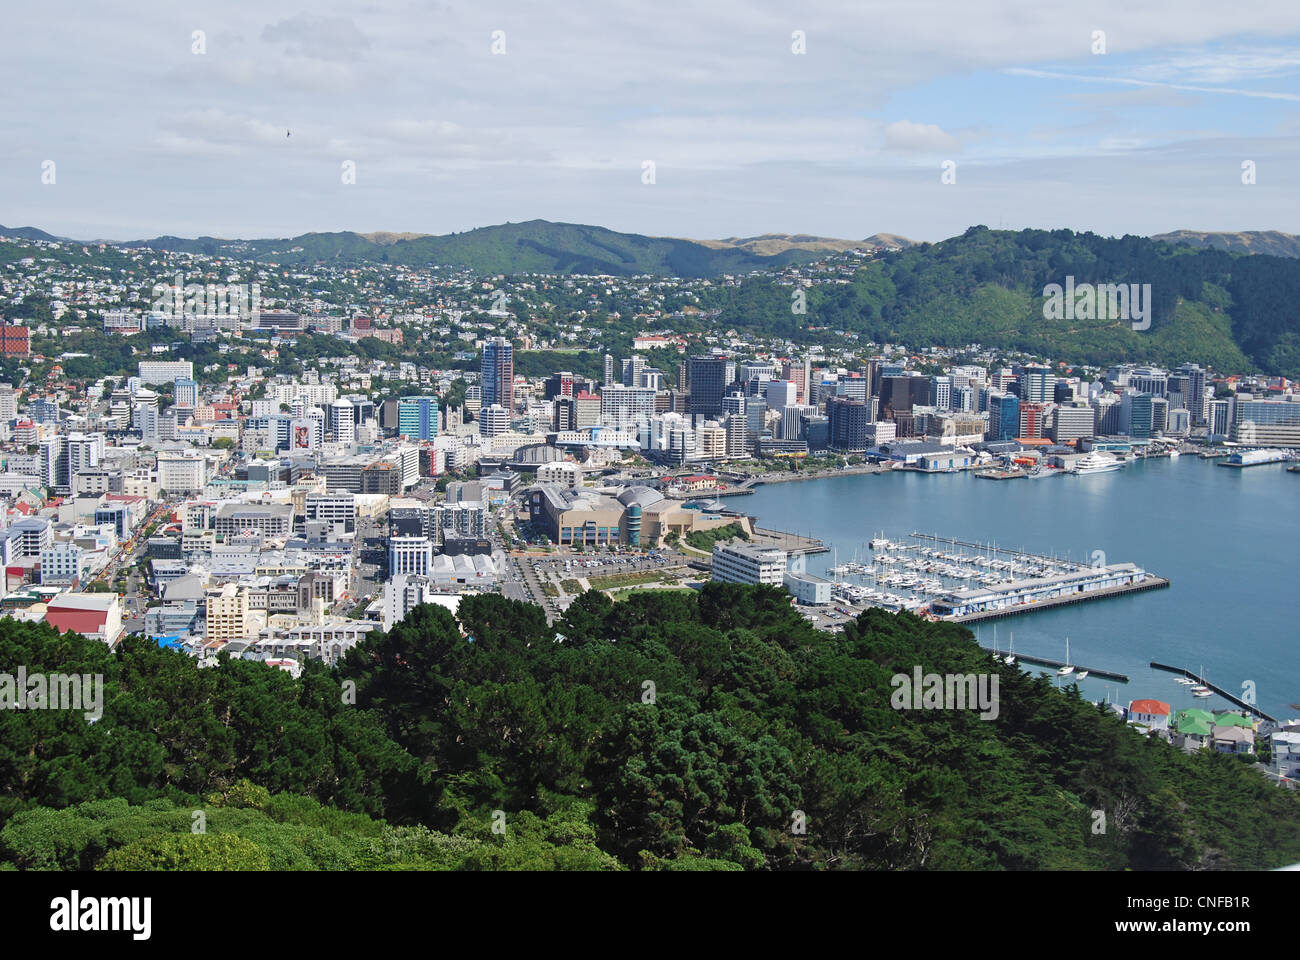 View of city and harbour from Mount Victoria Lookout, Wellington, Wellington Region, North Island, New Zealand Stock Photo